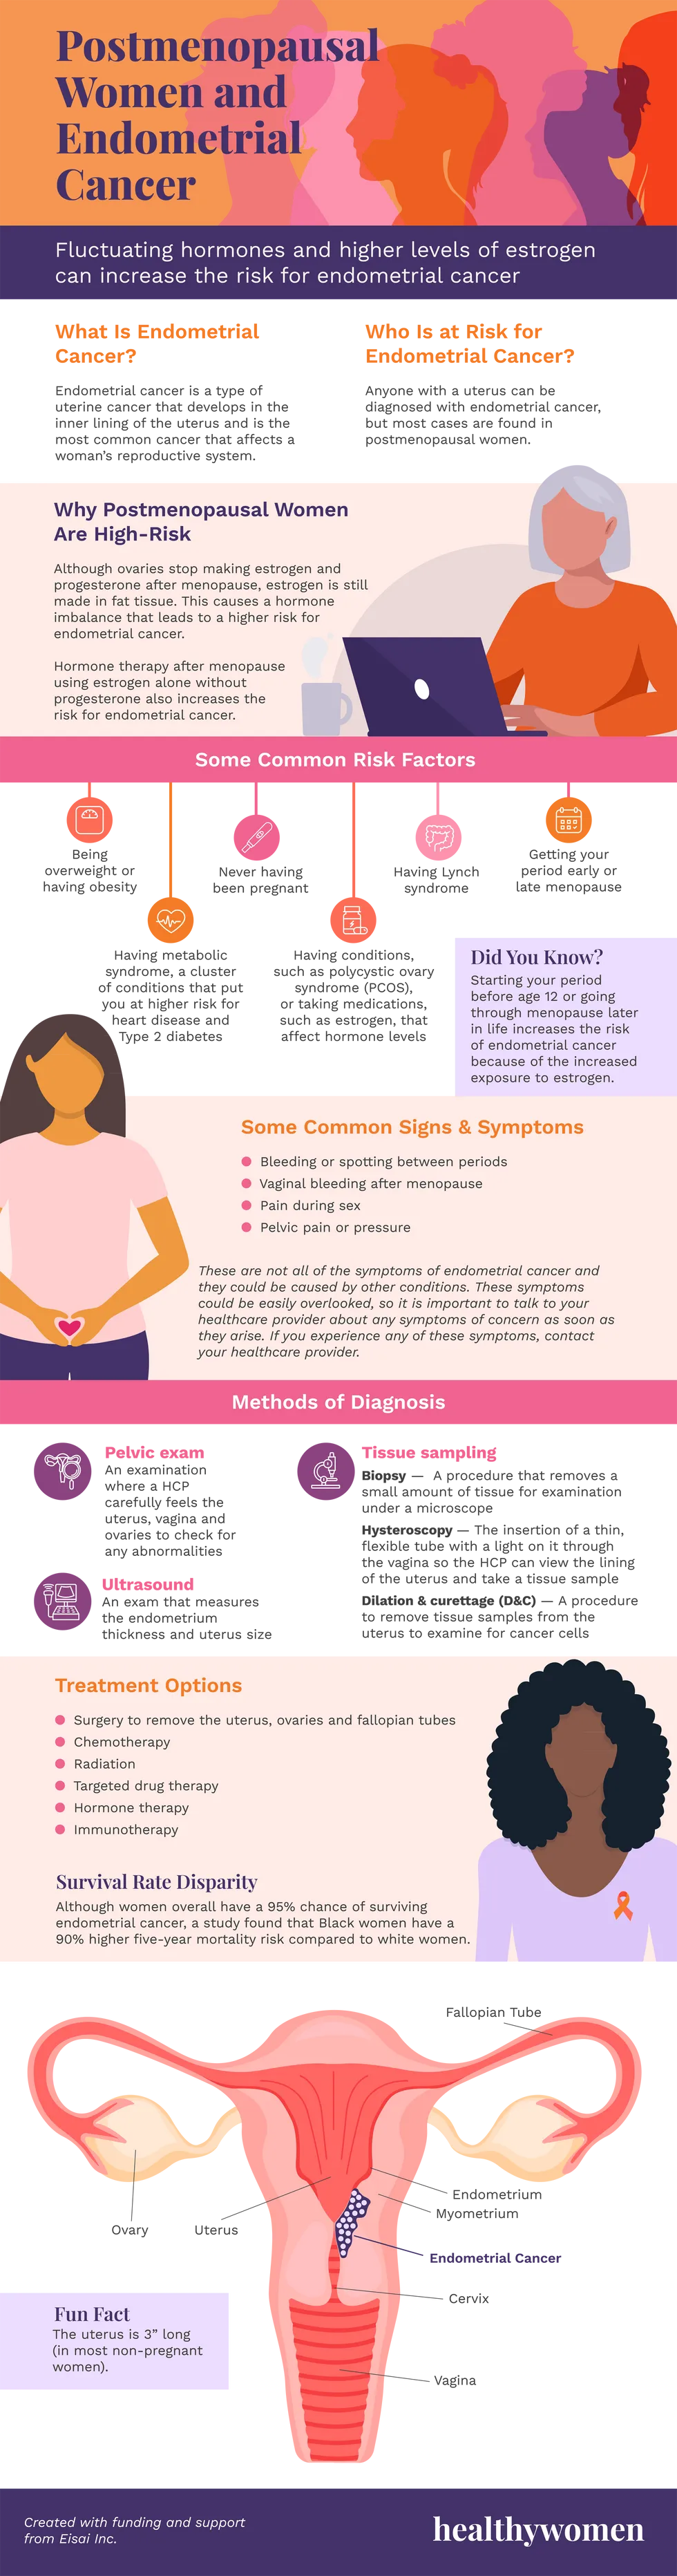 Infographic Postmenopausal Women and Endometrial Cancer. Click the image to open the PDF